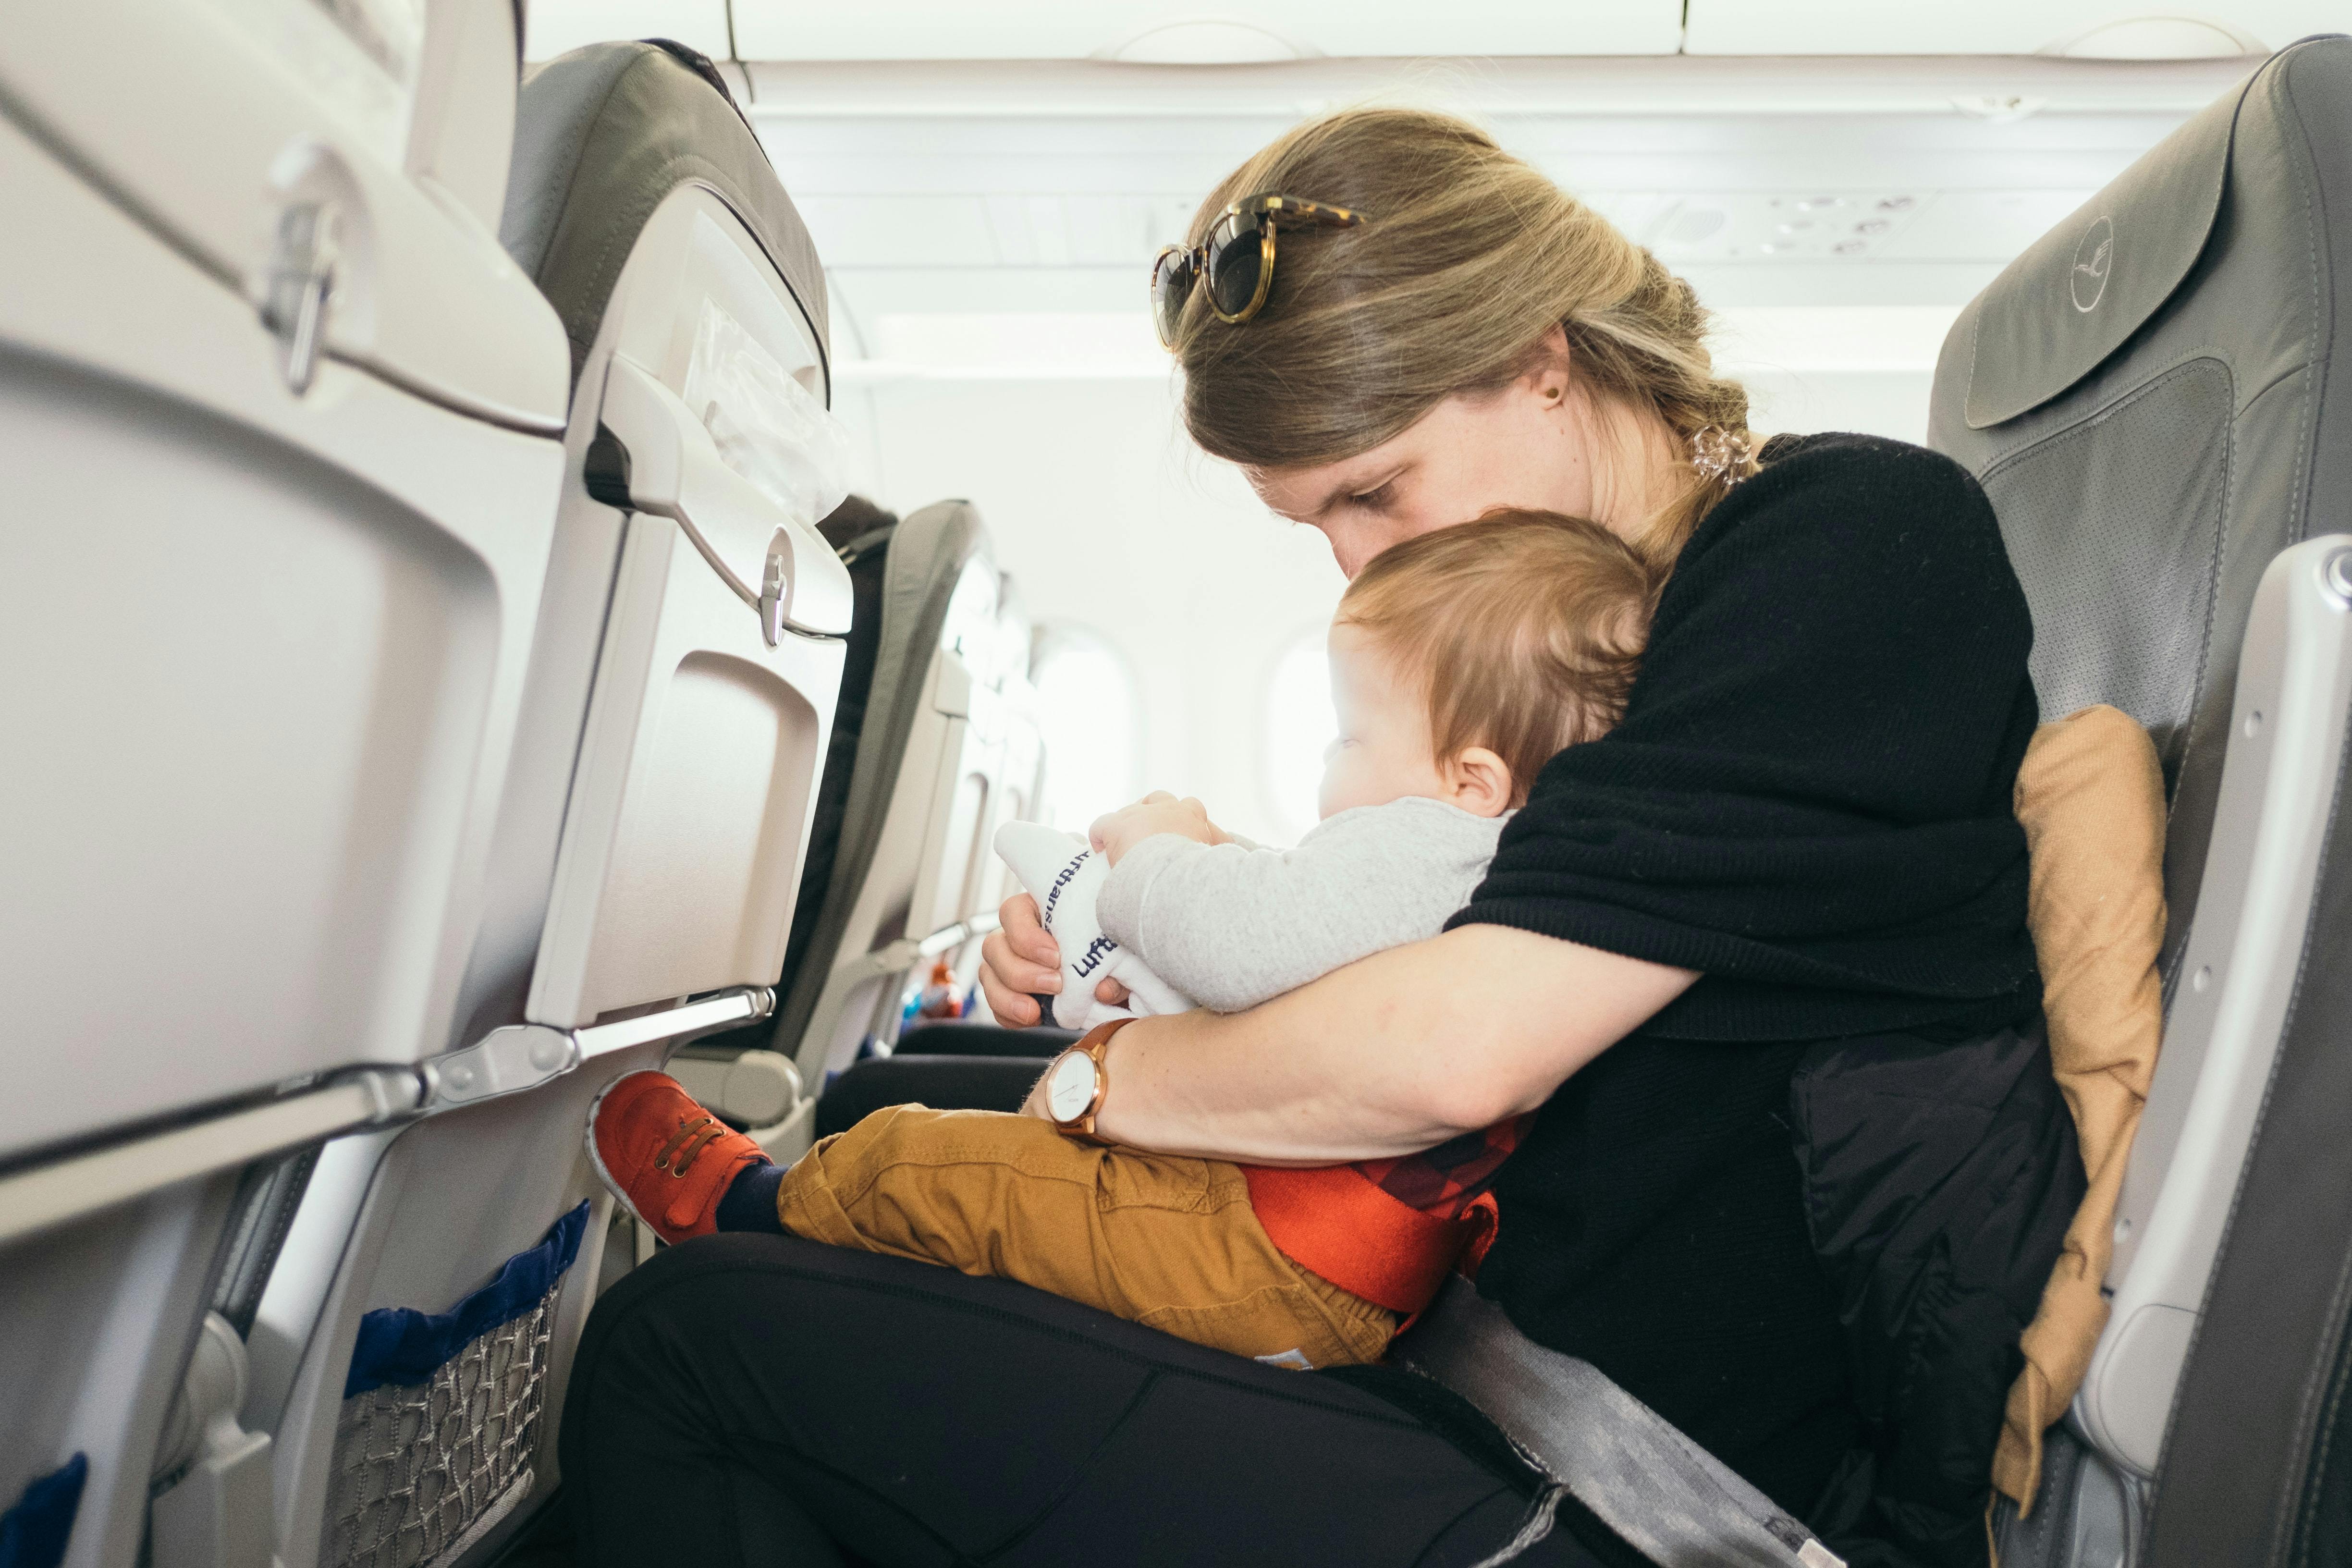 A baby and a mom sitting in seats on an airplane.